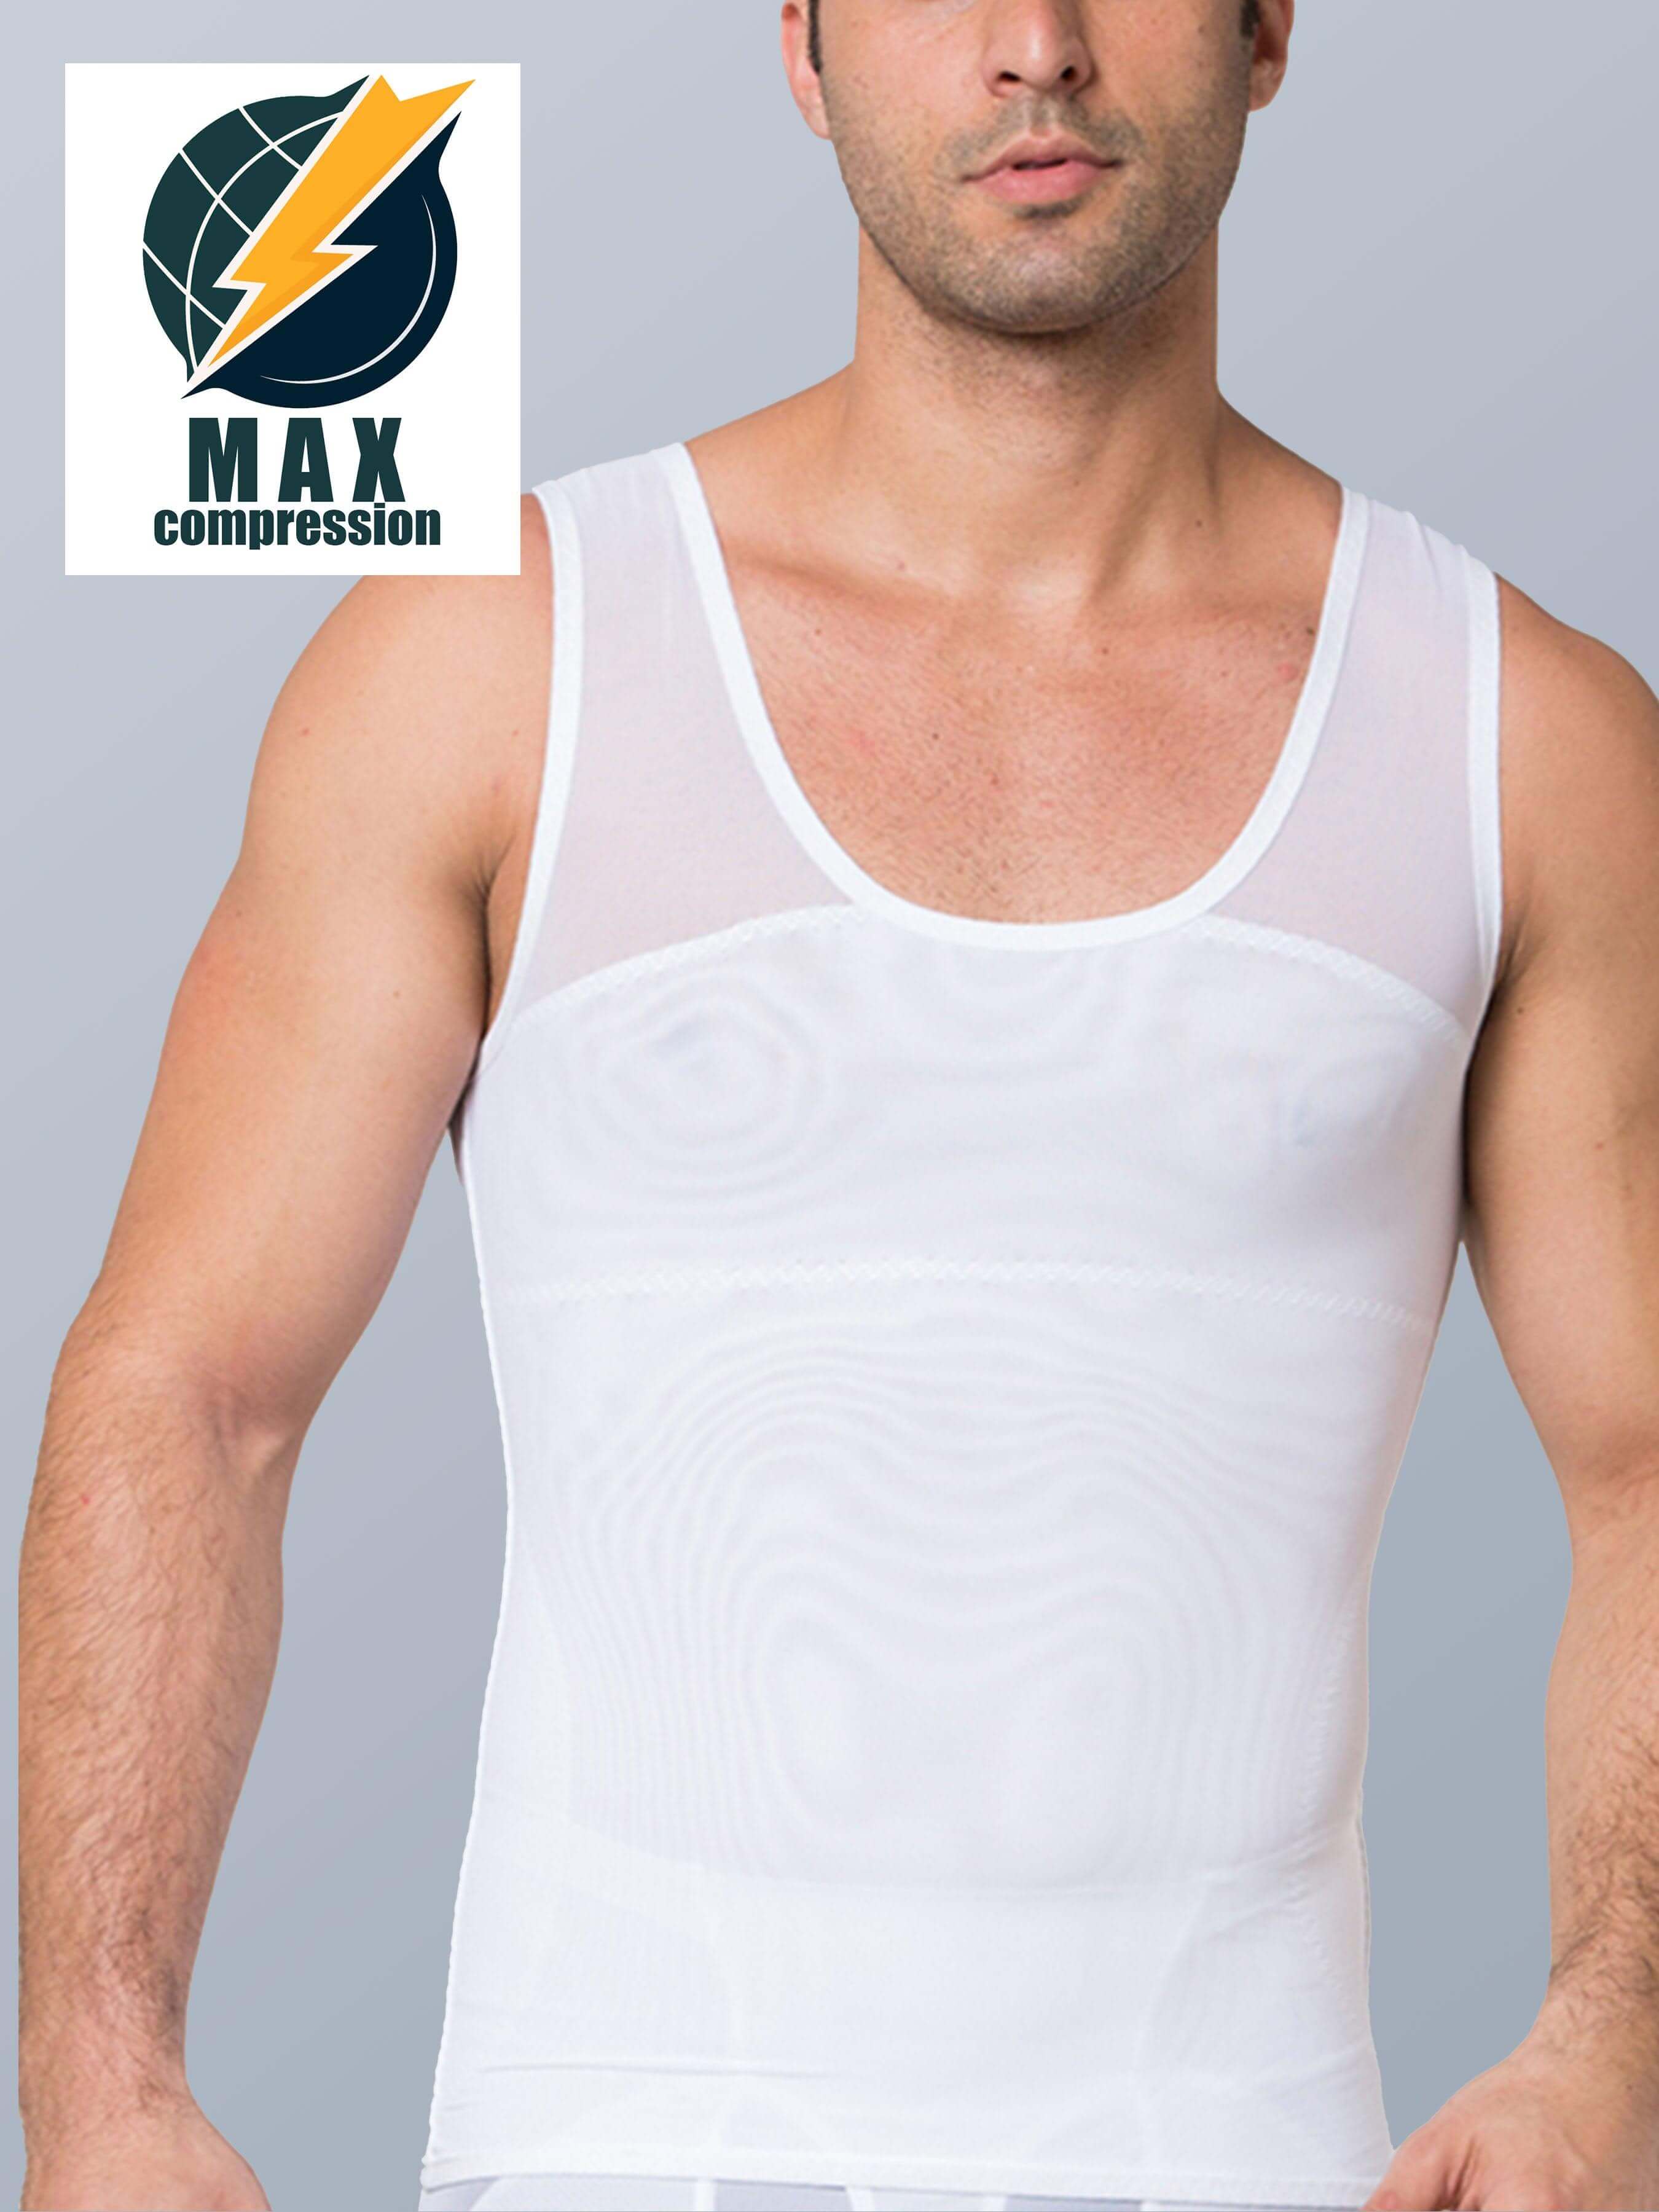 Compression shirt to hide excessive breast growth in men!